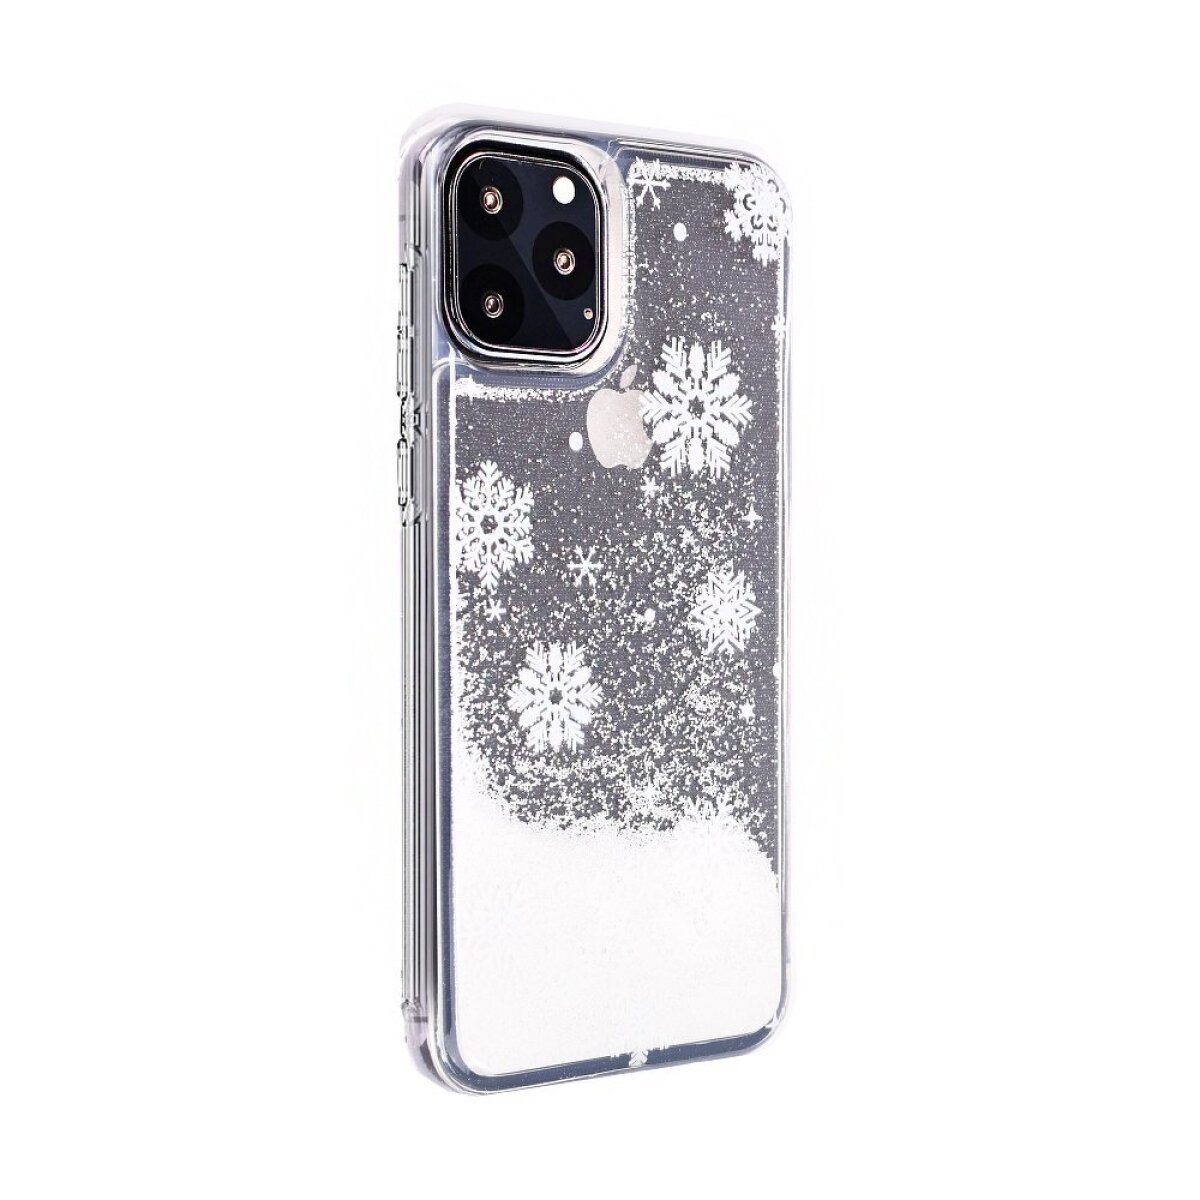 FORCELL Winter P Smart 2019 Not snowflakes, available Full P Cover, 2019, smart Huawei